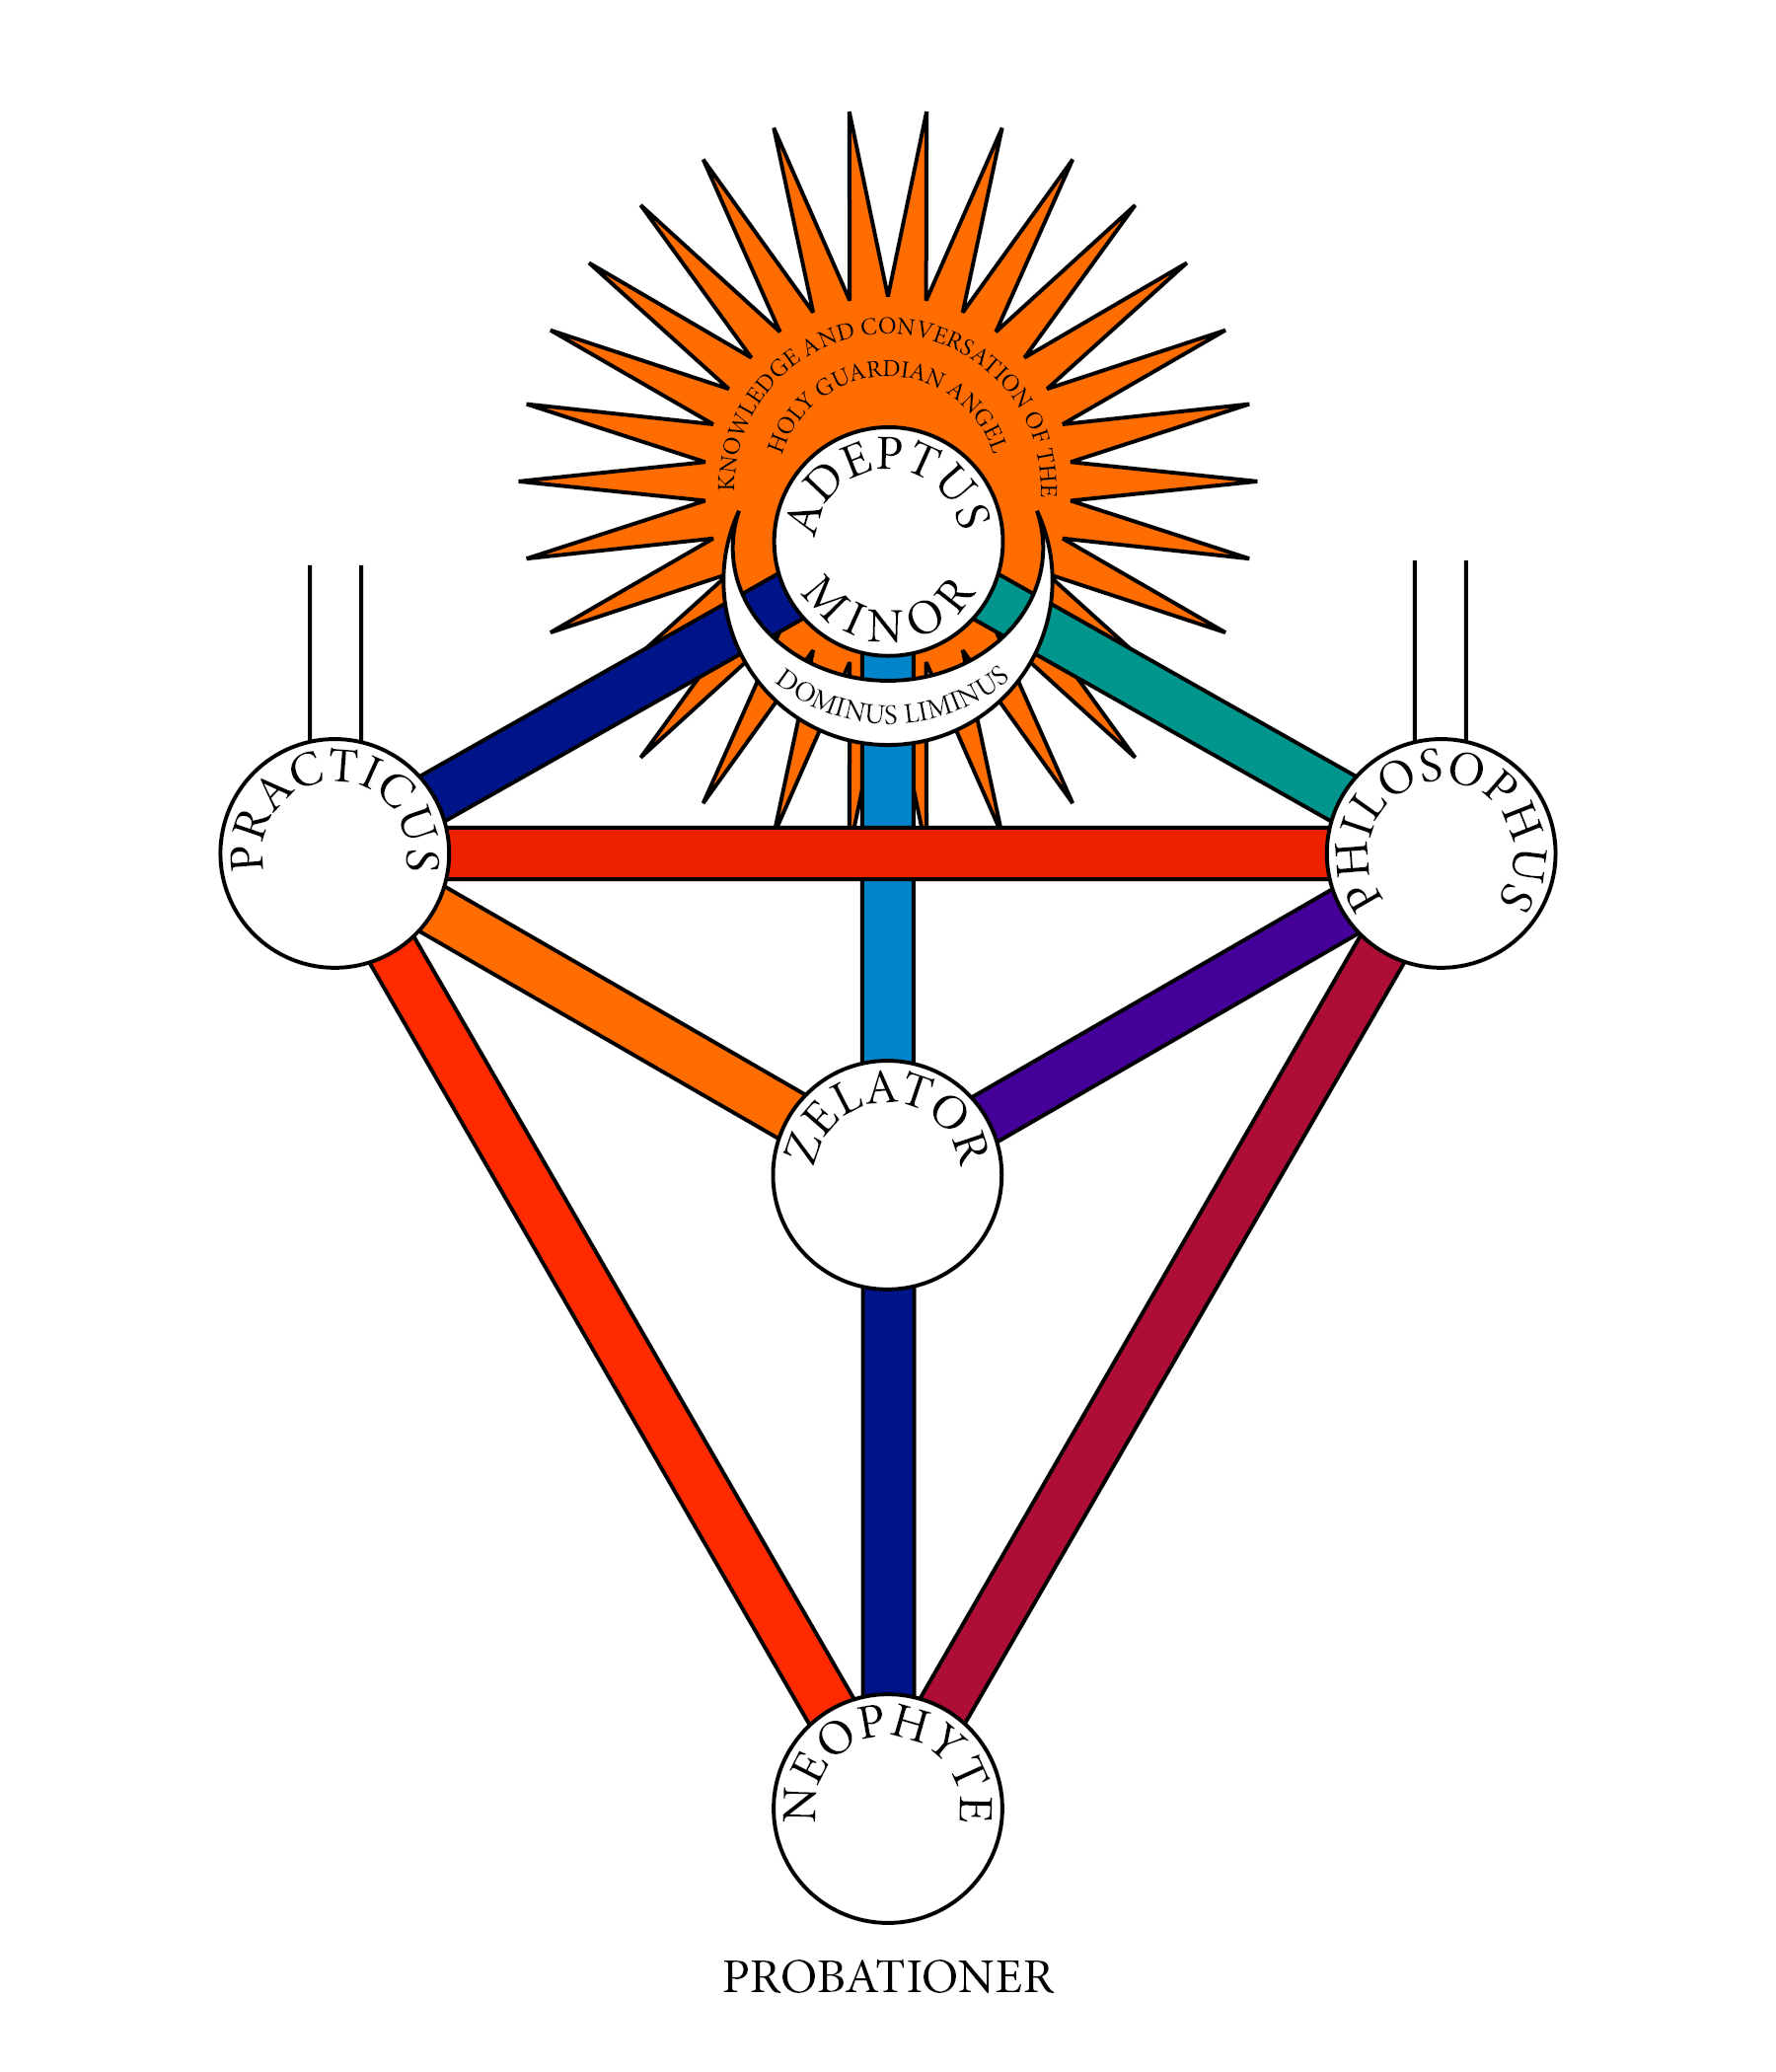 Bottom five sephiroth of the Tree of Life with paths colored in and AA grade names in each sphere. Sunblaze around Tiphareth.